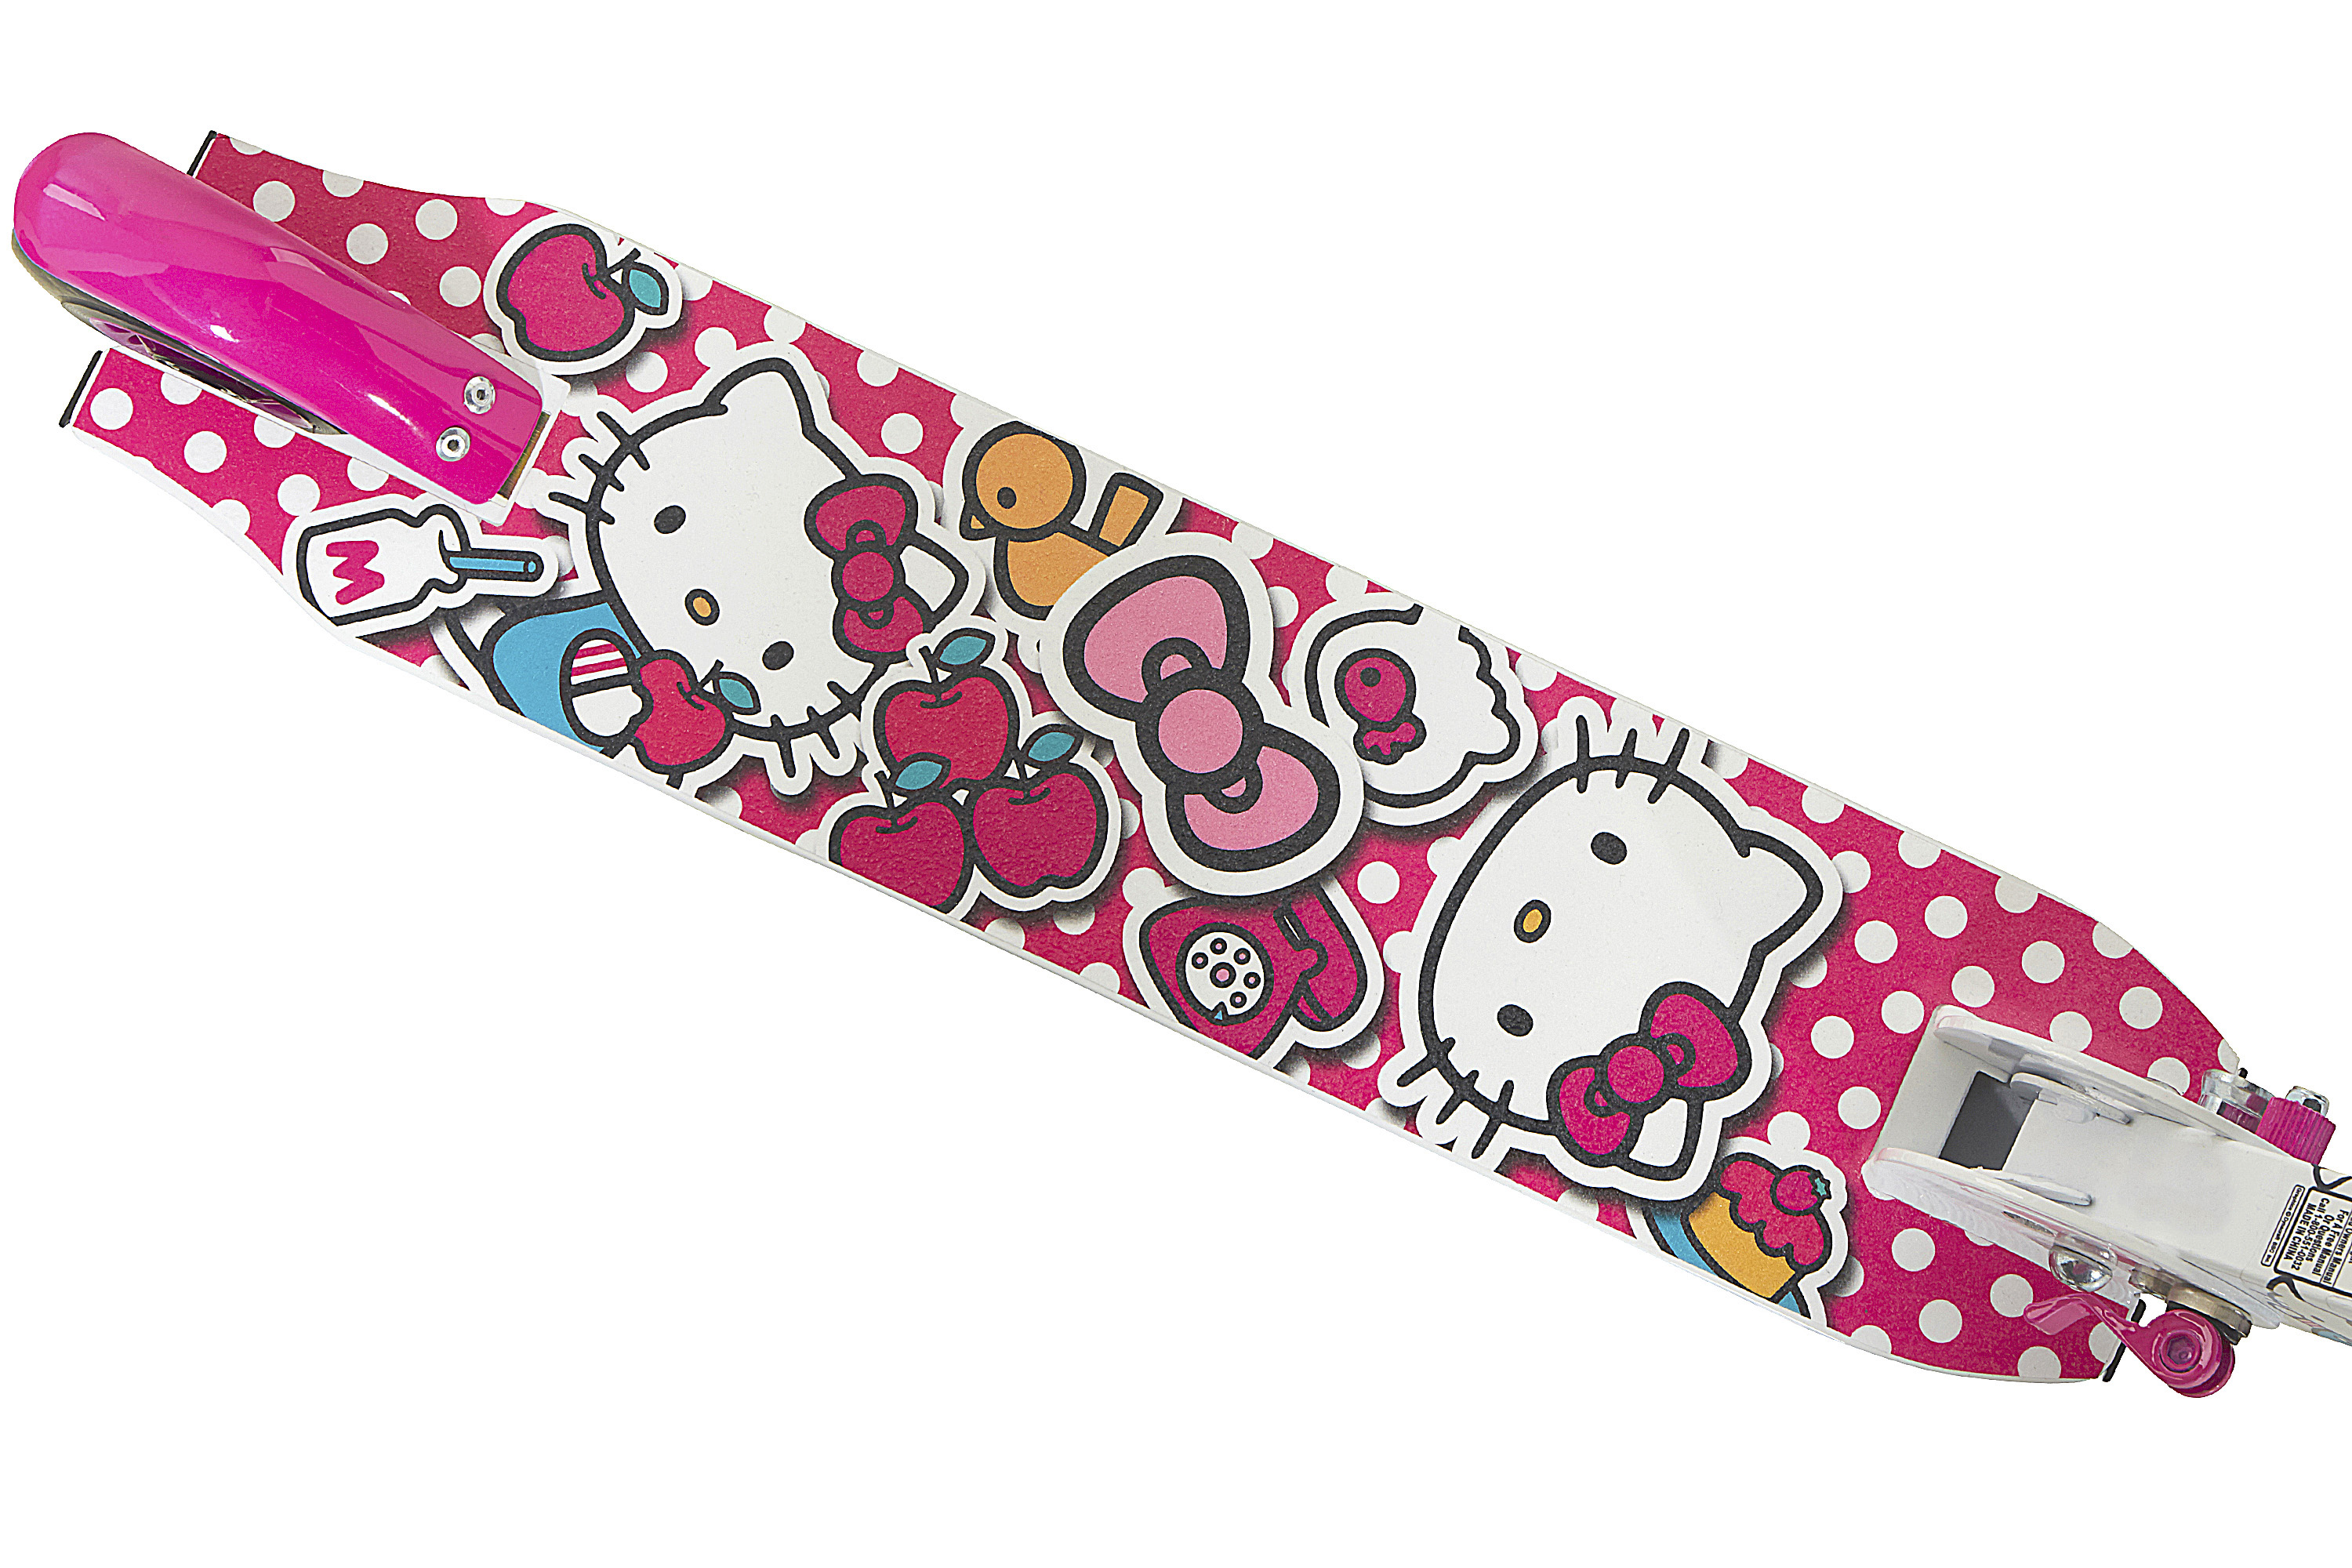 4" Girls' 2 Wheel Hello Kitty Folding Scooter by Dynacraft - image 2 of 5